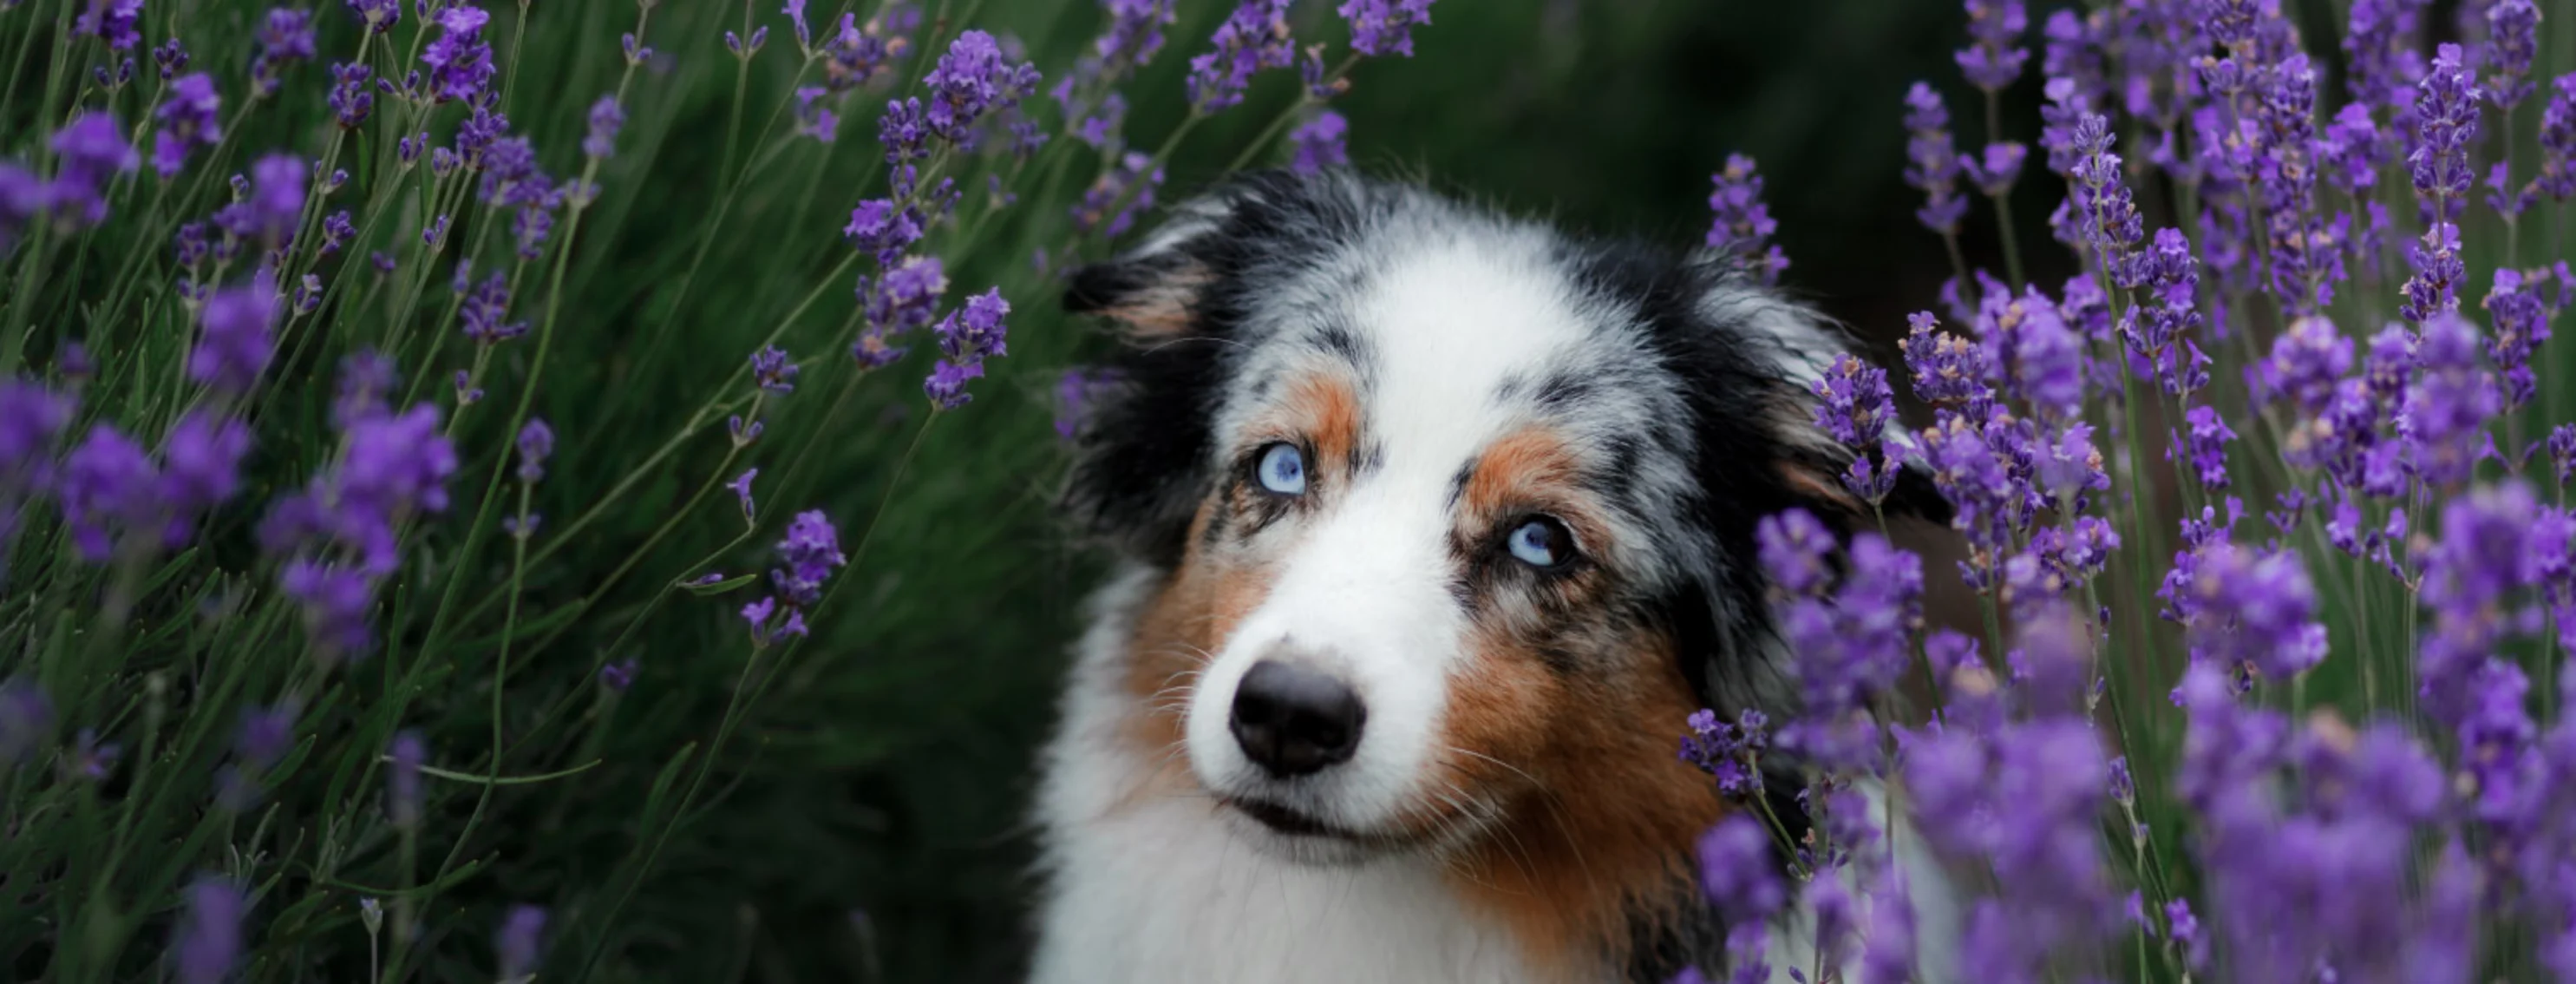 Black and white dog sitting in field of purple lavender flowers